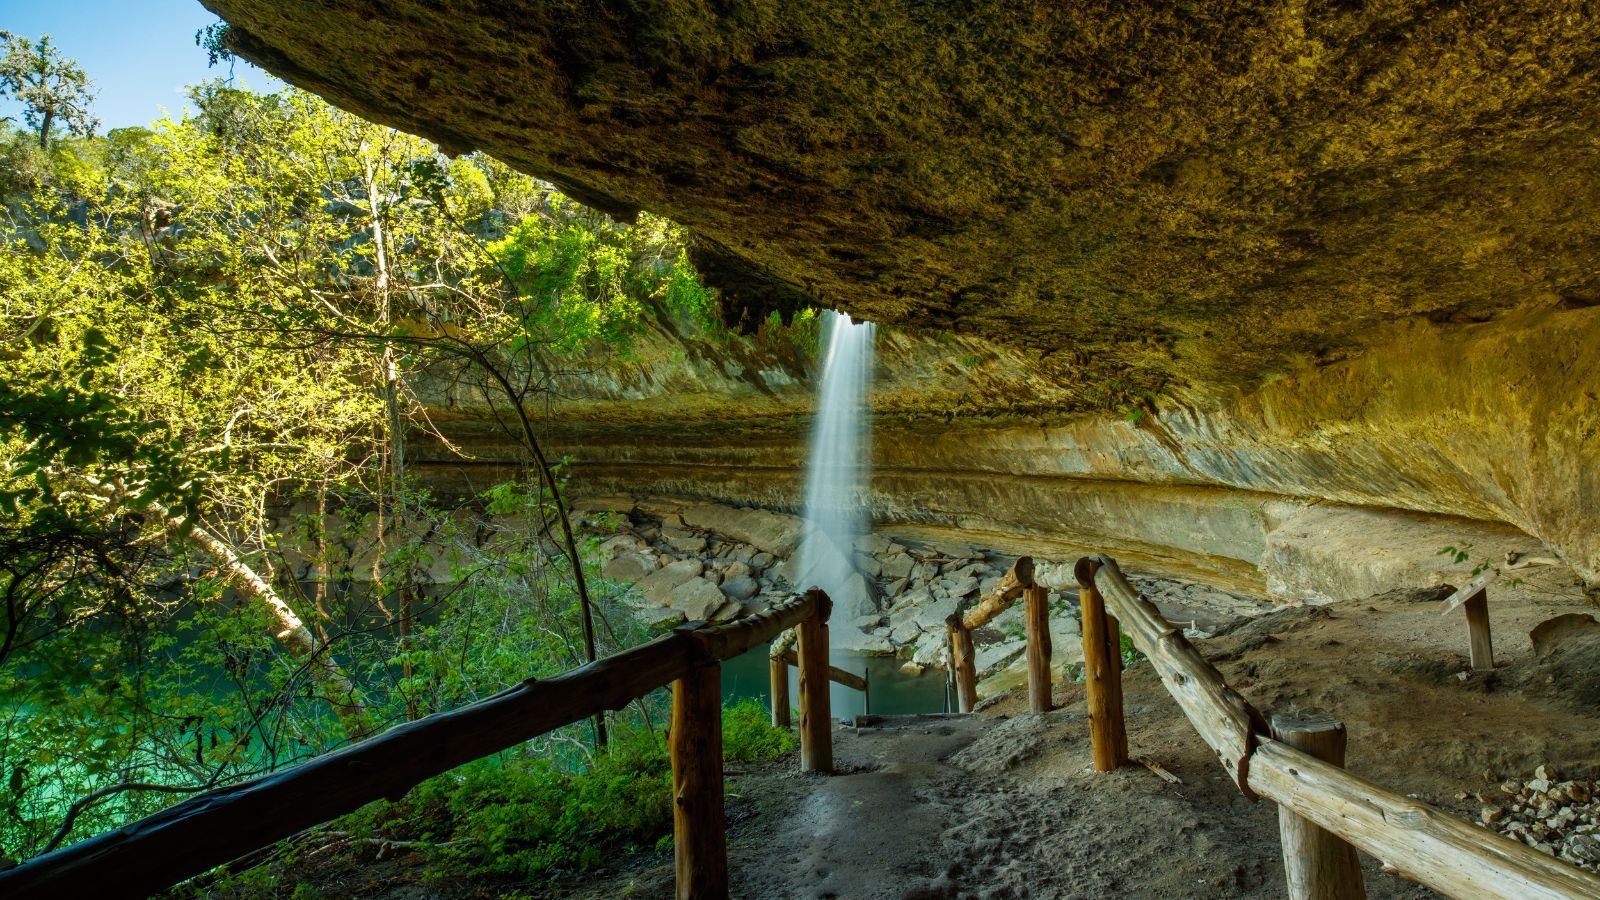 <p>Hamilton Pool Preserve, located near Austin, Texas, features a 50-foot waterfall and beautiful greenish-blue waters. It’s an ideal location for hiking and relaxing in a natural swimming pool. This place was formed long ago when an underground river’s roof collapsed.</p>